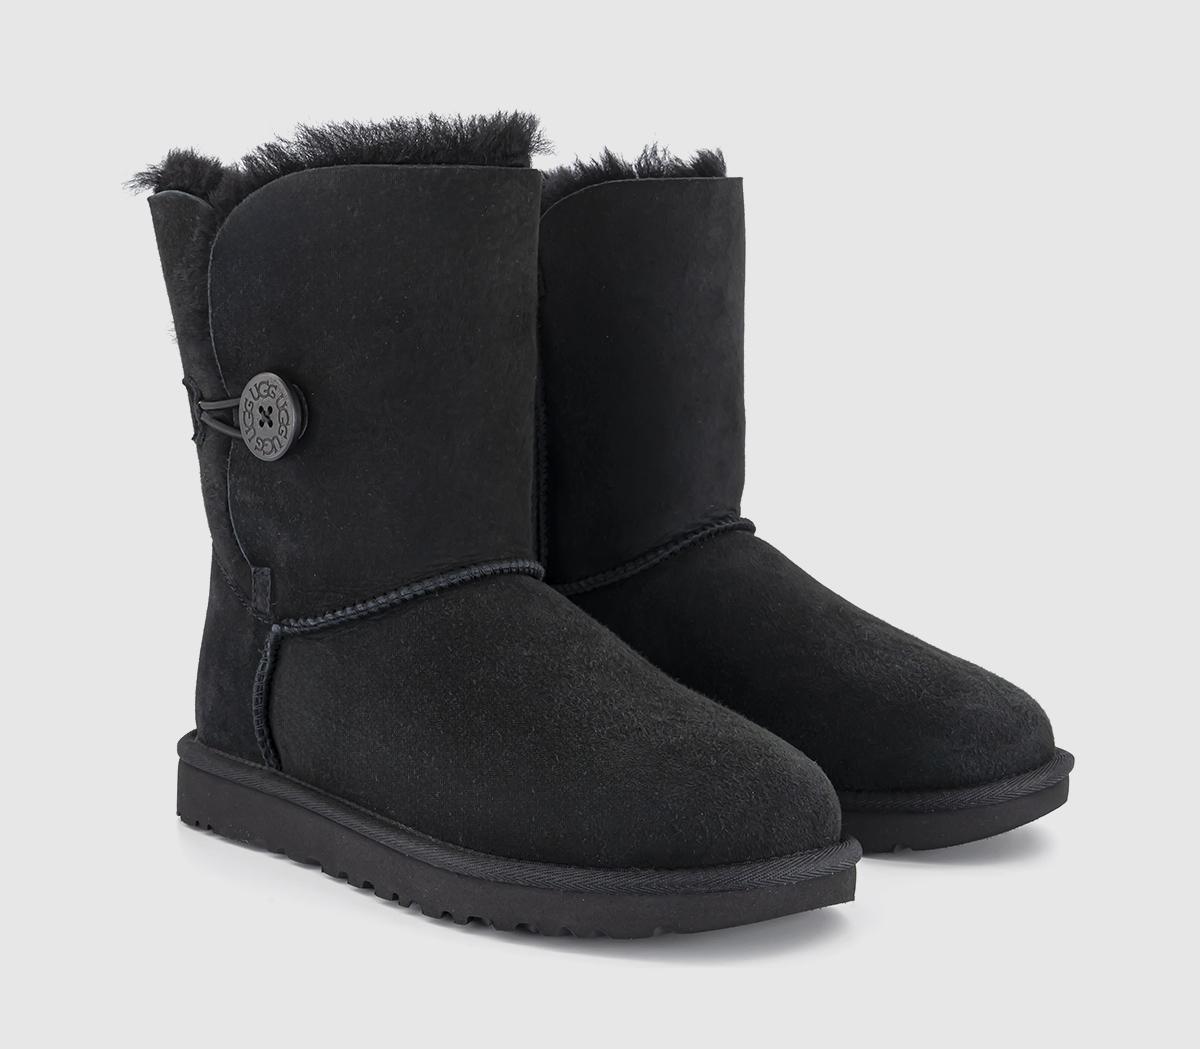 UGG Bailey Button II Boots Black Suede - Women's Ankle Boots